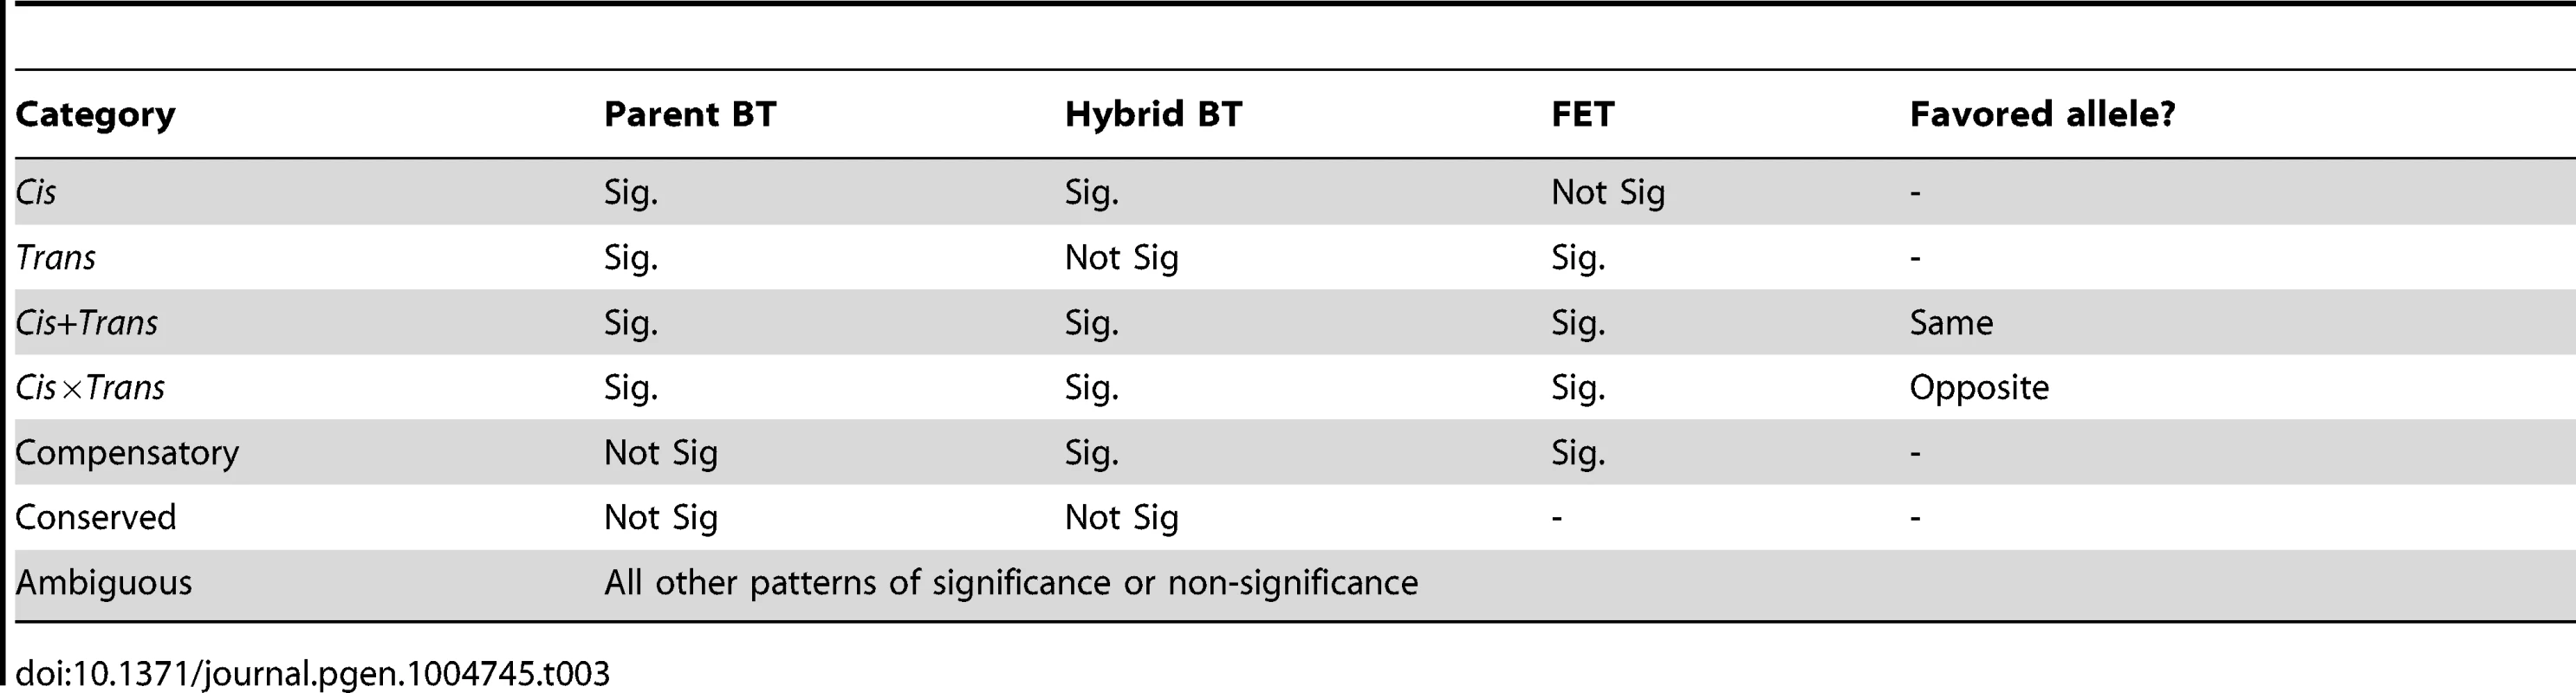 Regulatory category as defined by significant (Sig.) with FDR&amp;lt;0.005 or not significant (Not Sig.) binomial tests (BT) and Fisher's exact tests (FET).